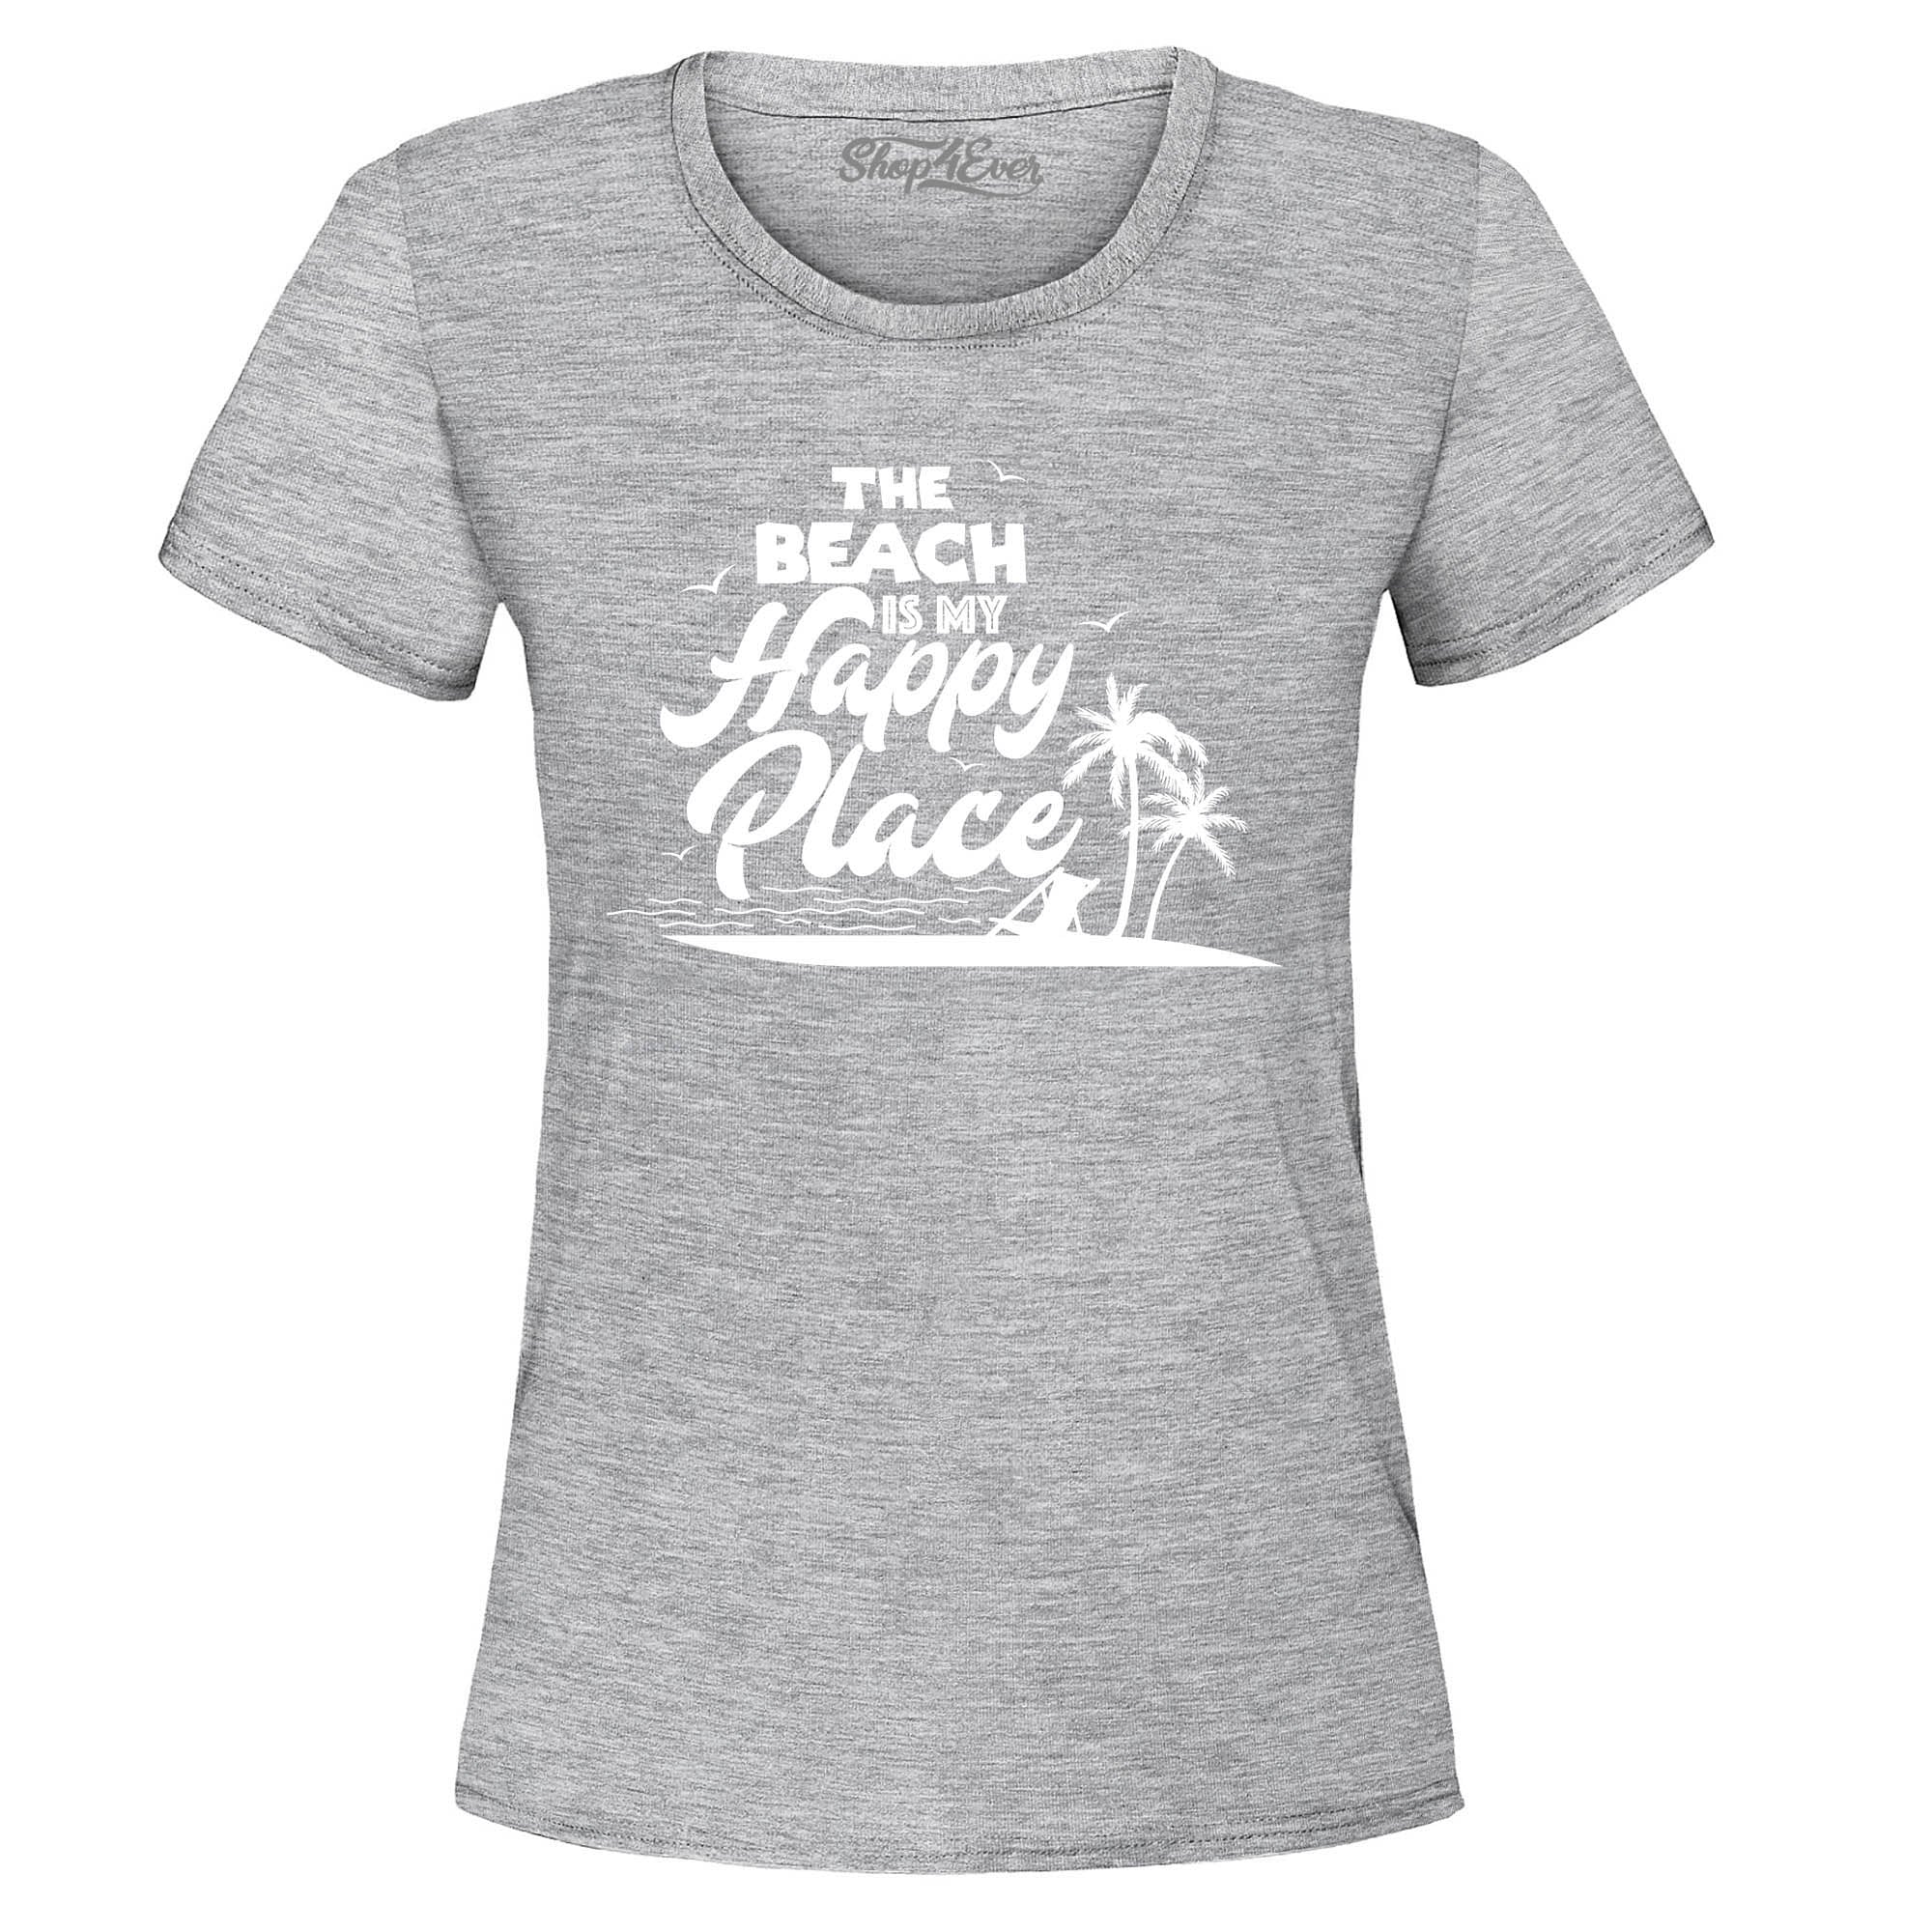 The Beach is My Happy Place Women's T-Shirt